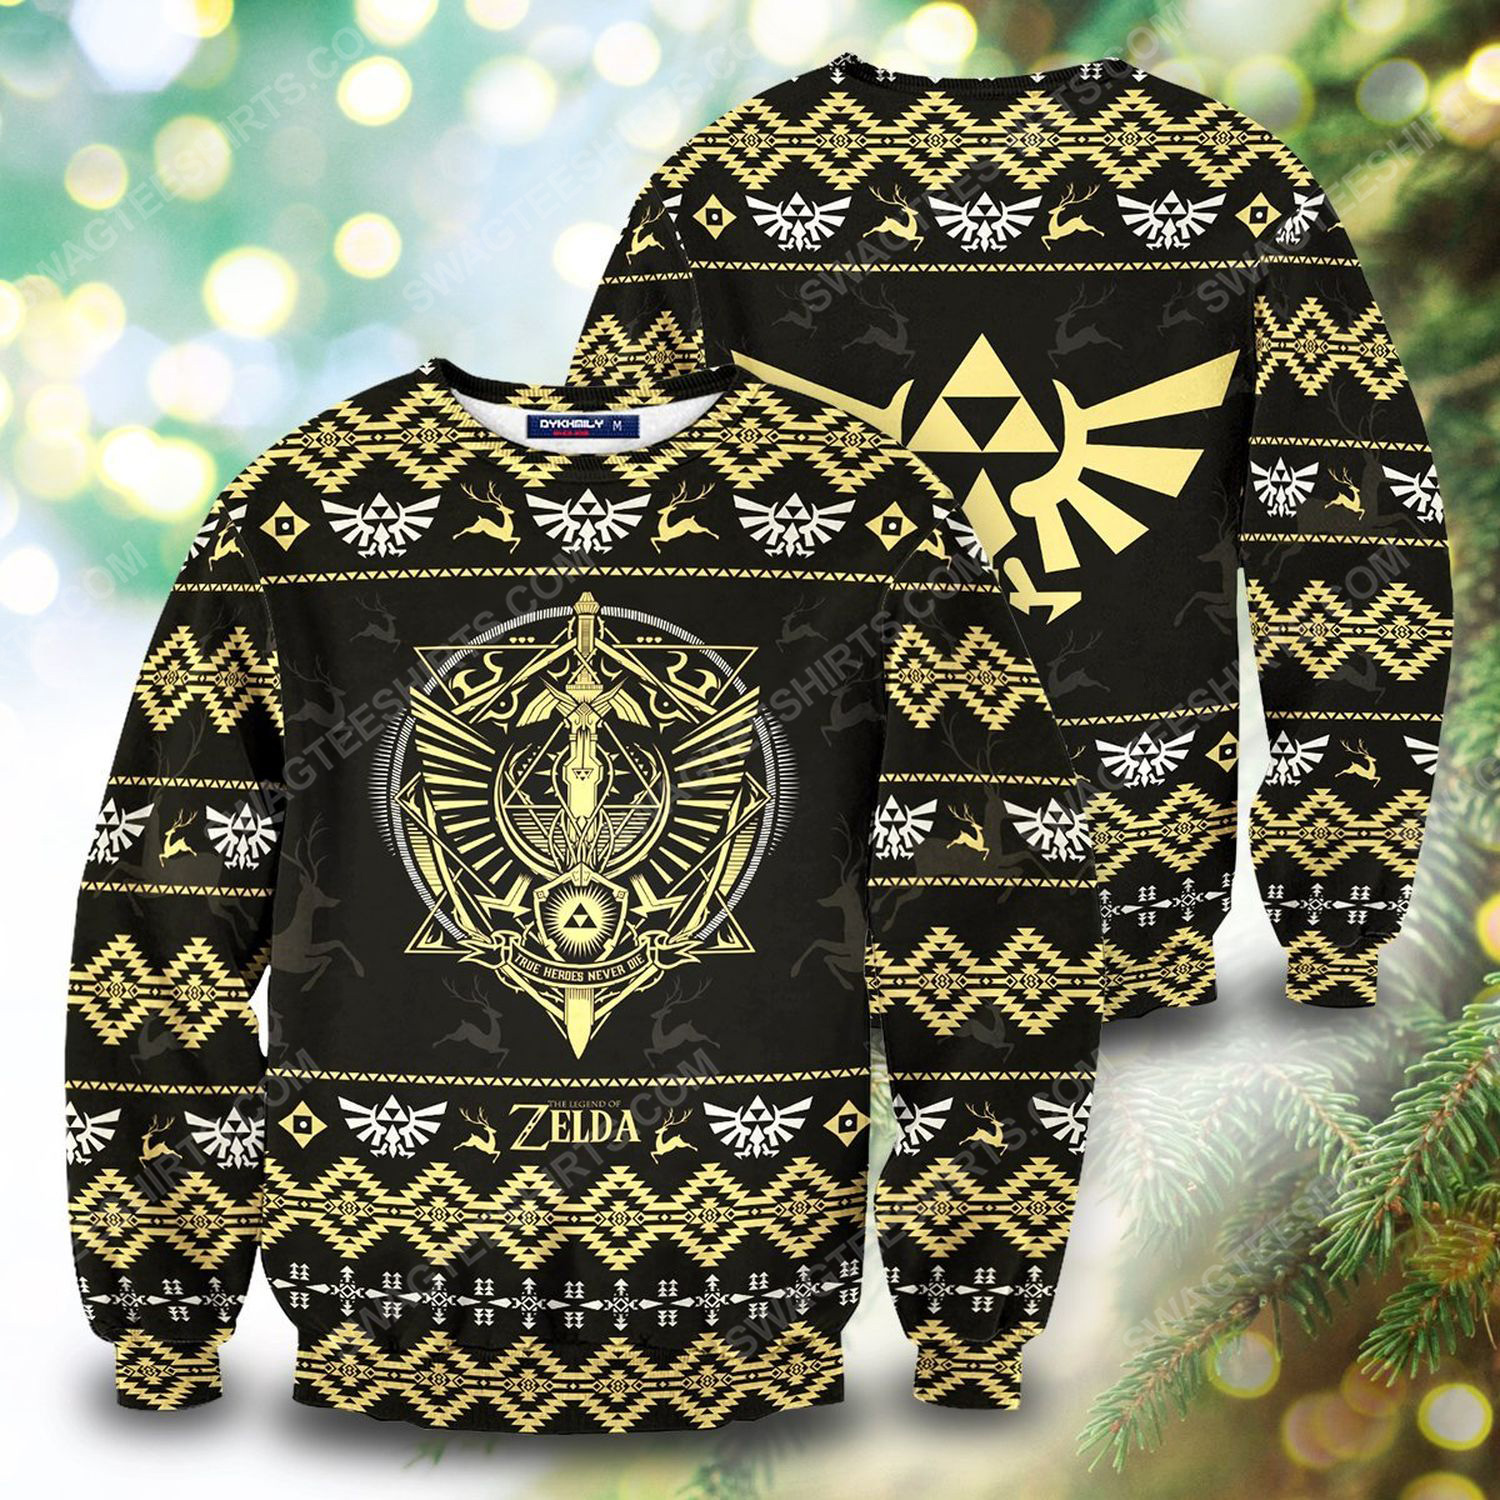 [special edition] LOZ master sword full print ugly christmas sweater – maria